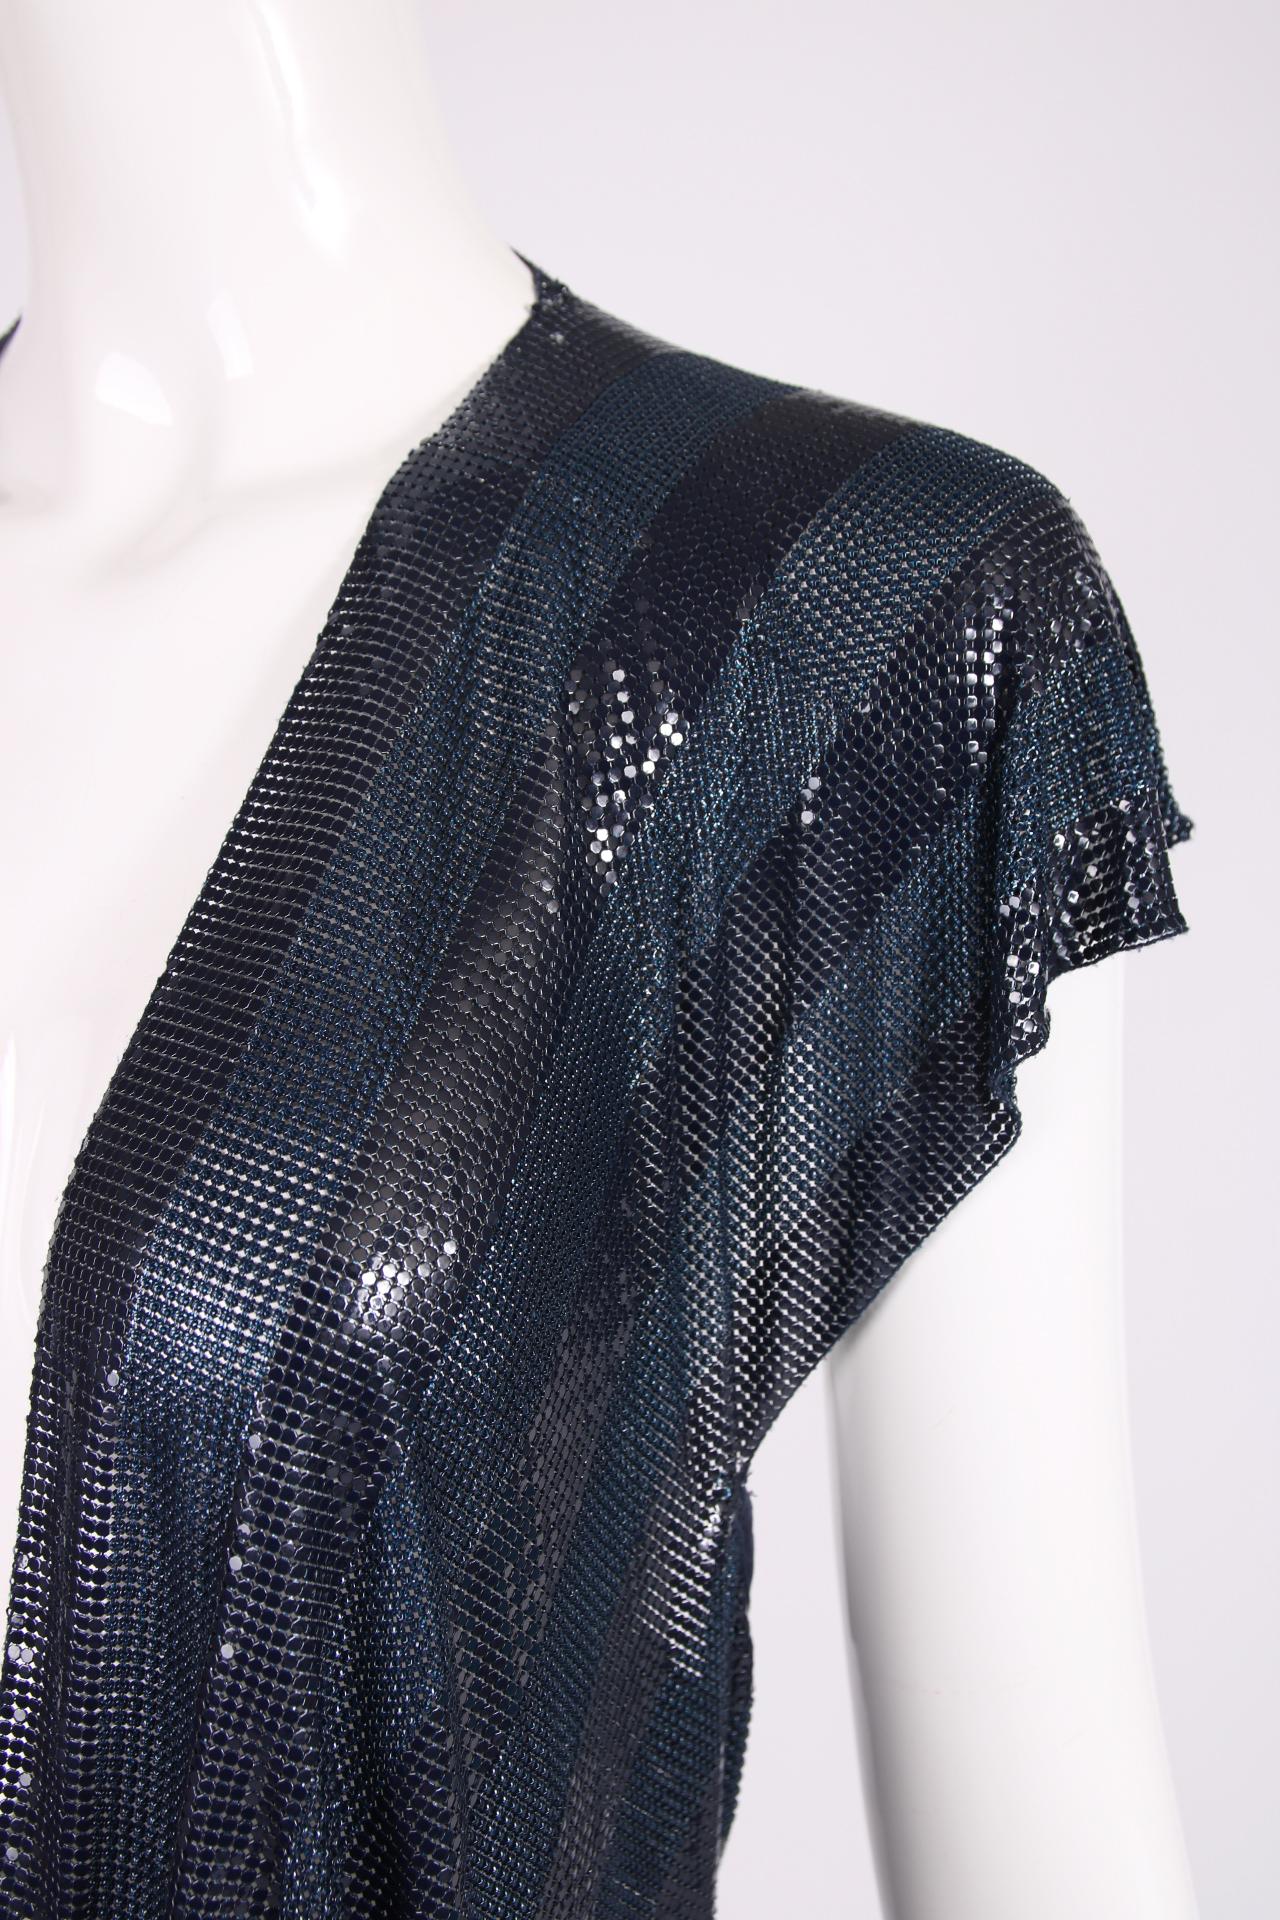 Vintage Gianni Versace Navy Striped Oroton Metal Mesh Chainmail Dress Ca. 1983 In Good Condition For Sale In Studio City, CA